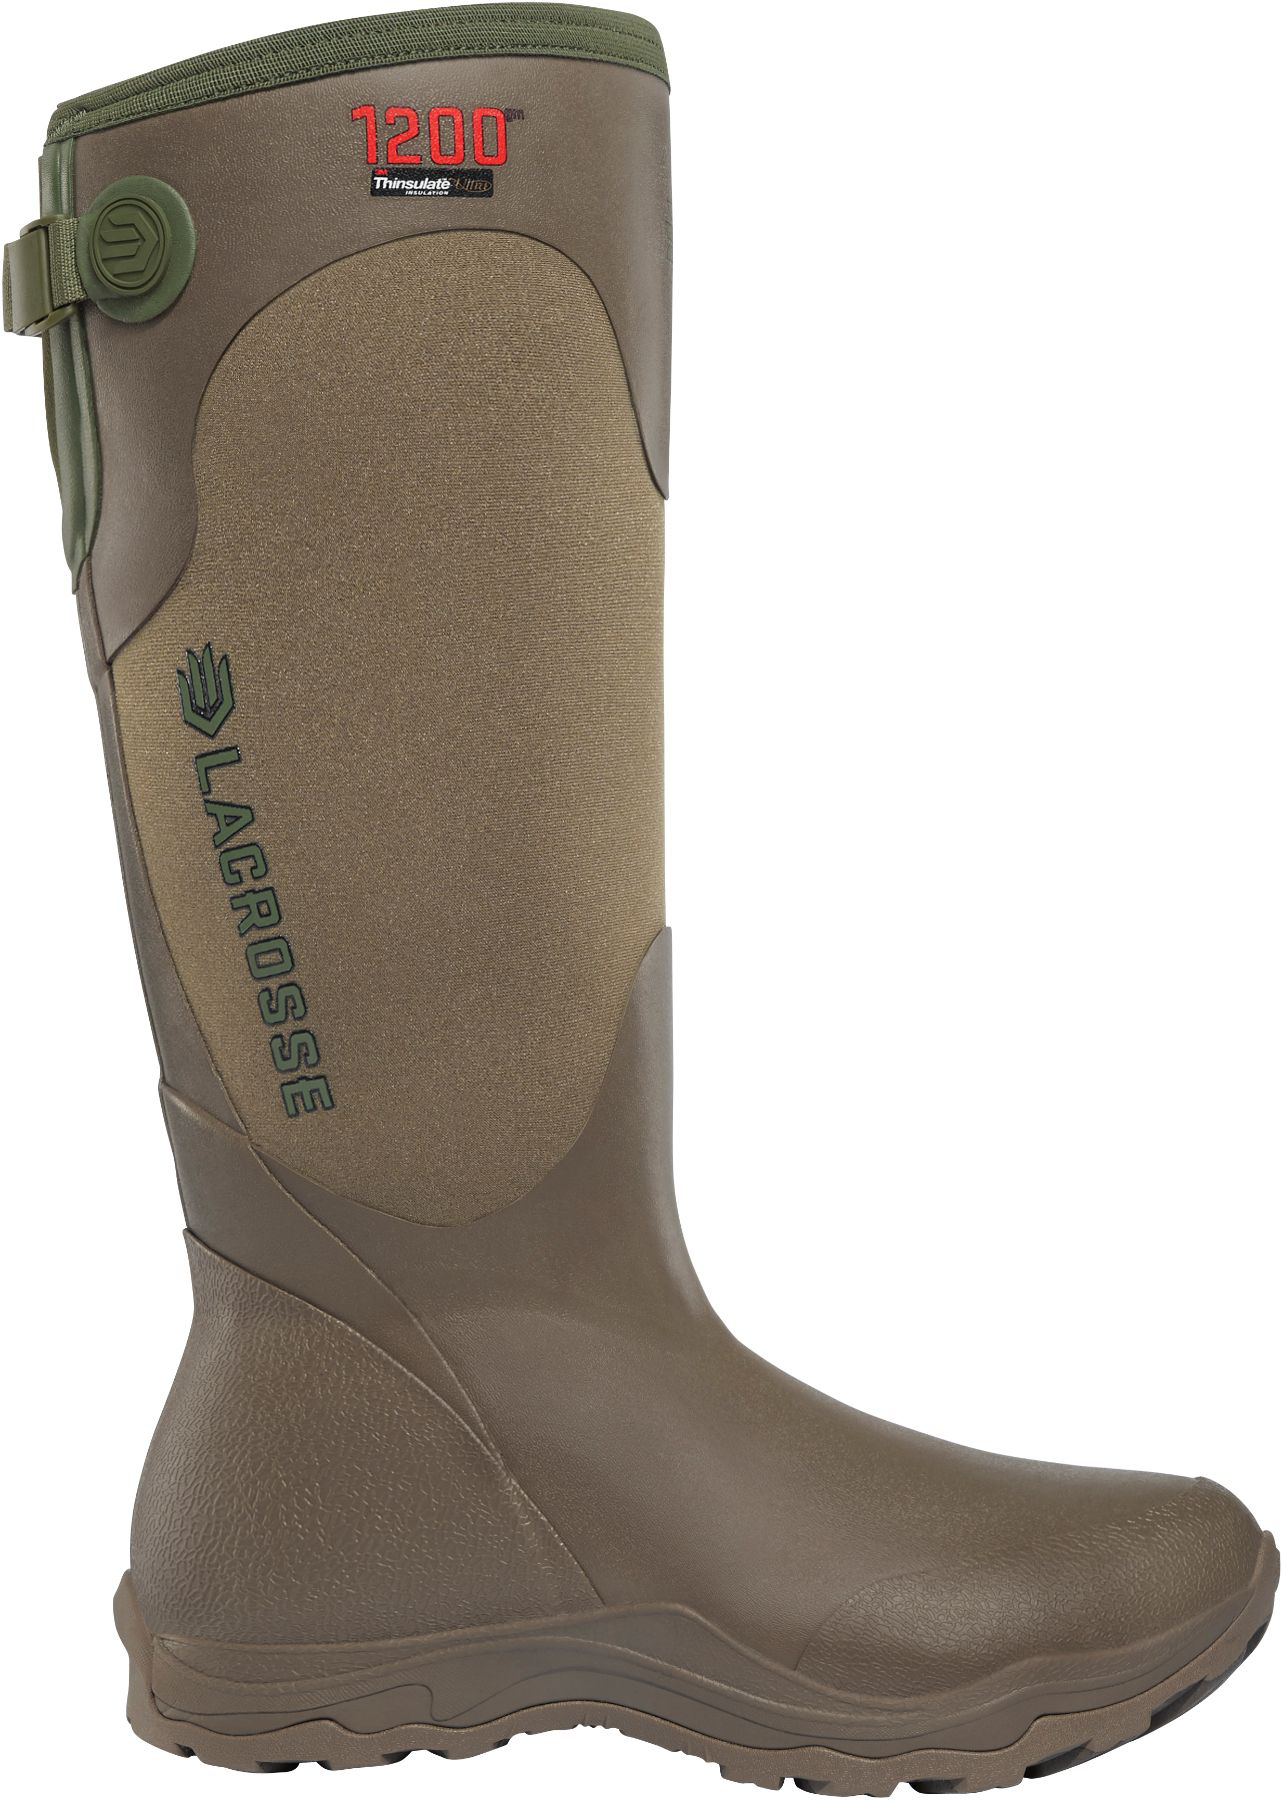 LaCrosse Alpha Agility 1200 Insulated Waterproof Hunting Boots for Ladies - Brown/Green - 7M